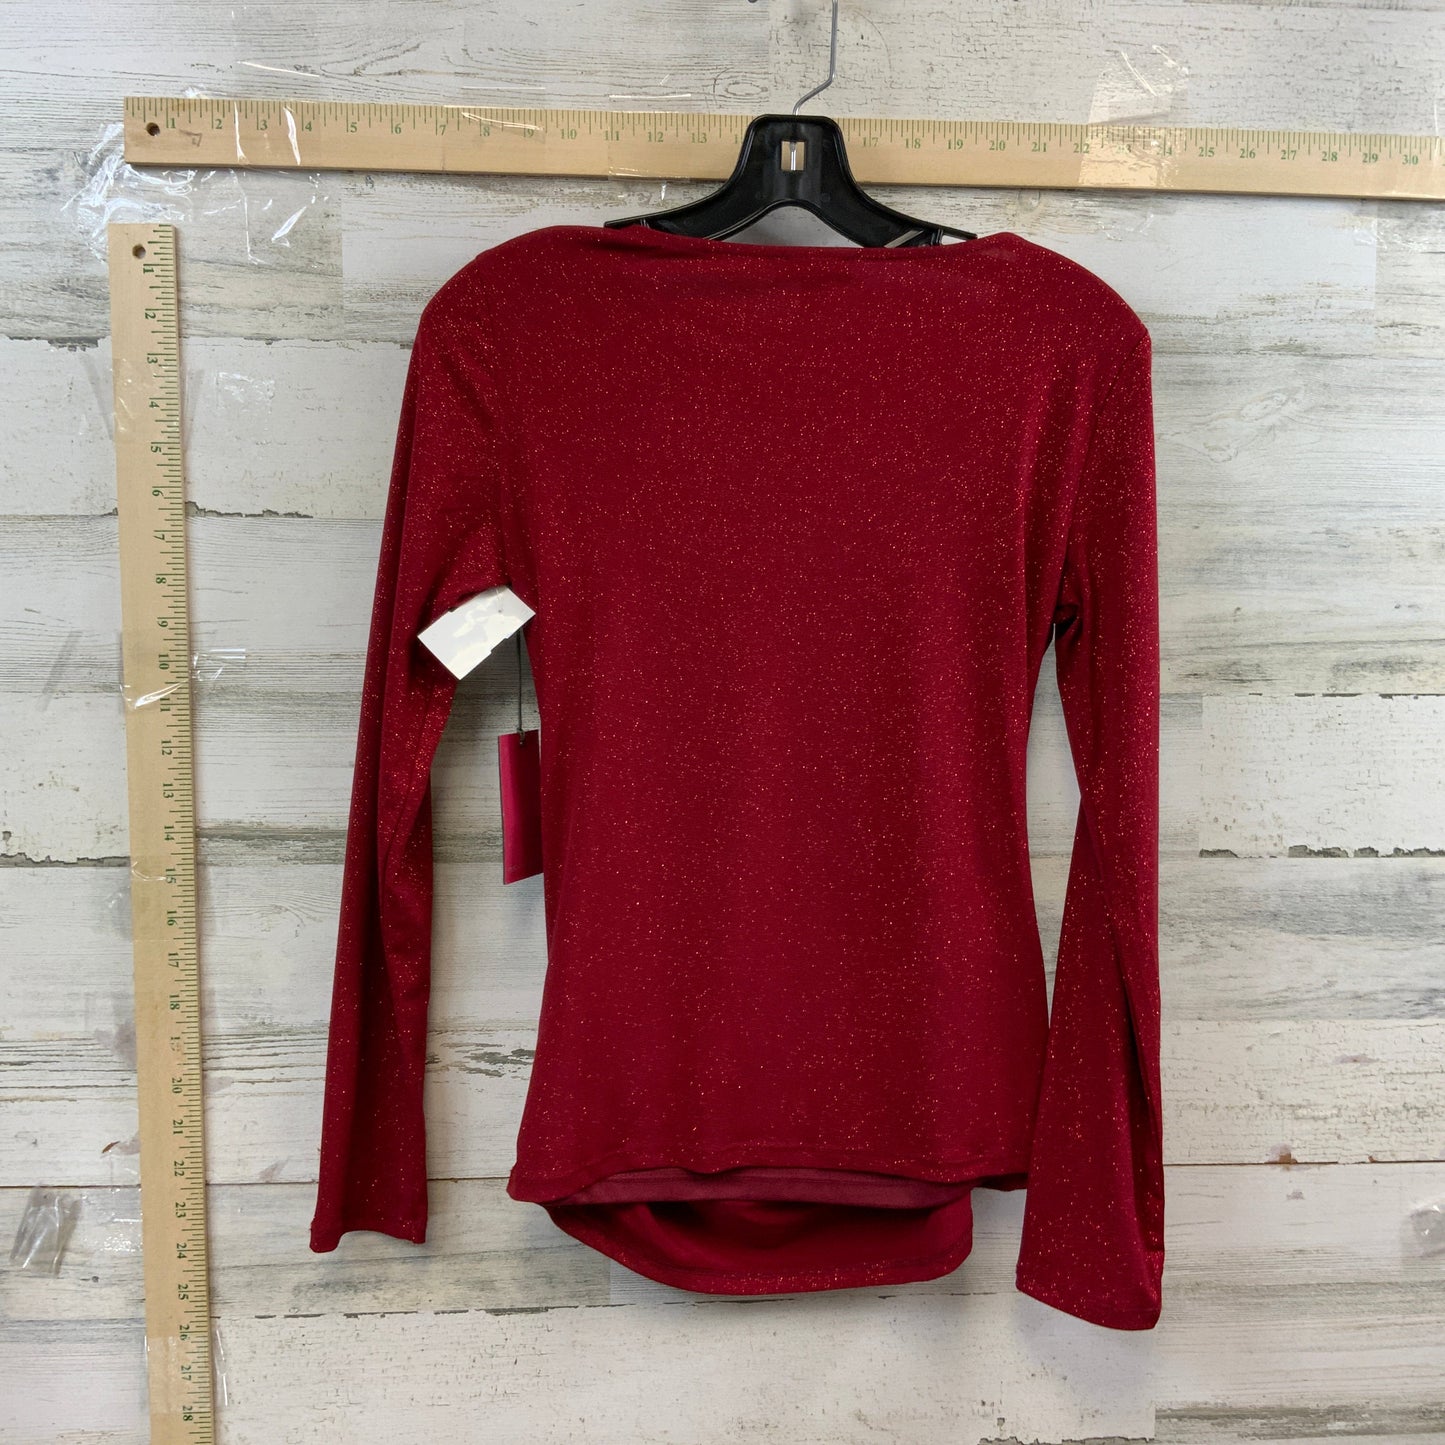 Top Long Sleeve By Vince Camuto  Size: Xs